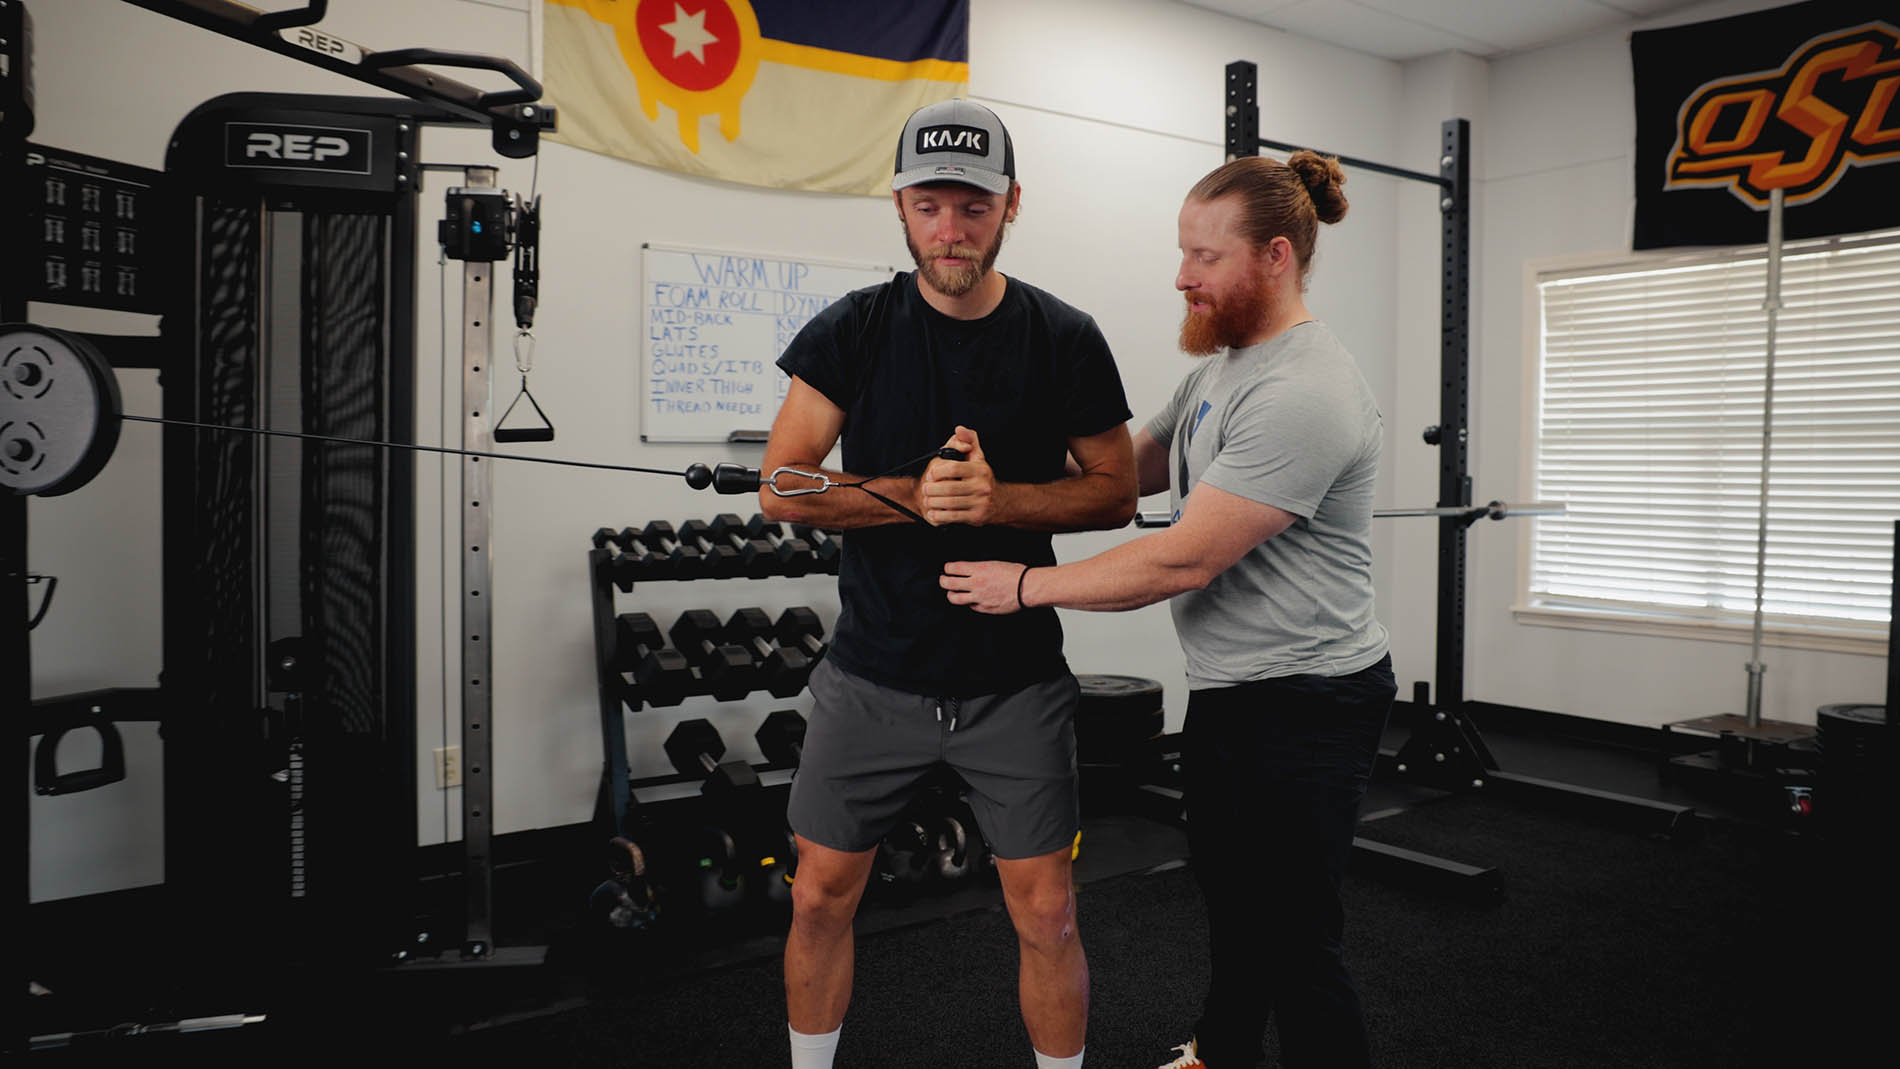 Two men in a gym, one with a beard assisting the other with a wrist device focused on physical therapy, standing by fitness equipment and a whiteboard with workout plans.